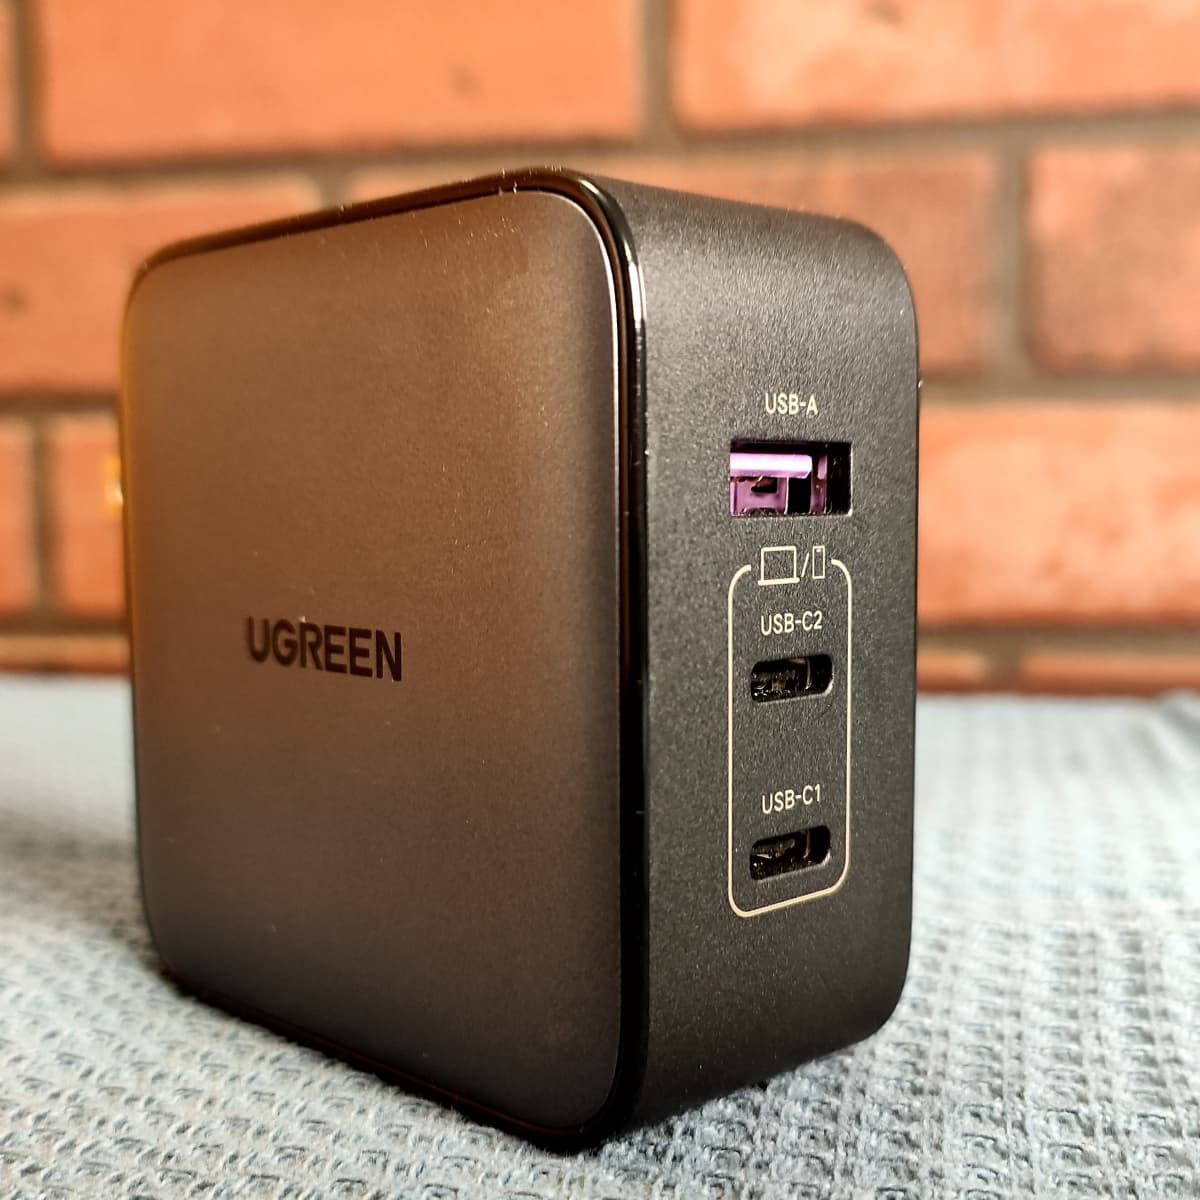 UGREEN 65W USB Charger and Power Adapter review - The Gadgeteer